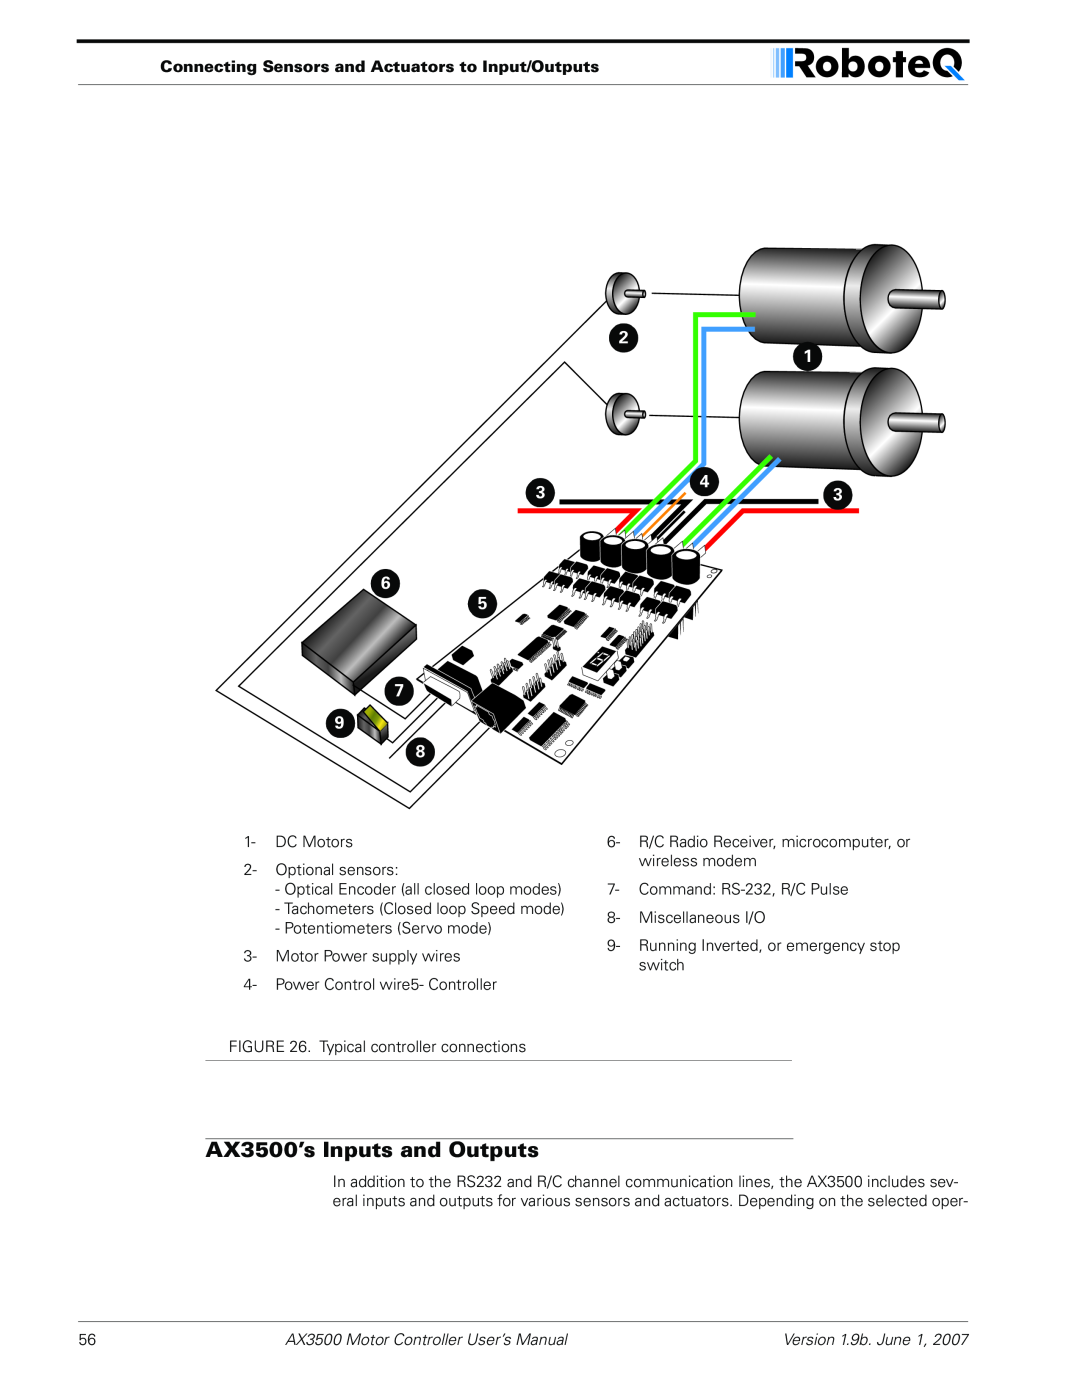 RoboteQ user manual AX3500’s Inputs and Outputs, Connecting Sensors and Actuators to Input/Outputs 